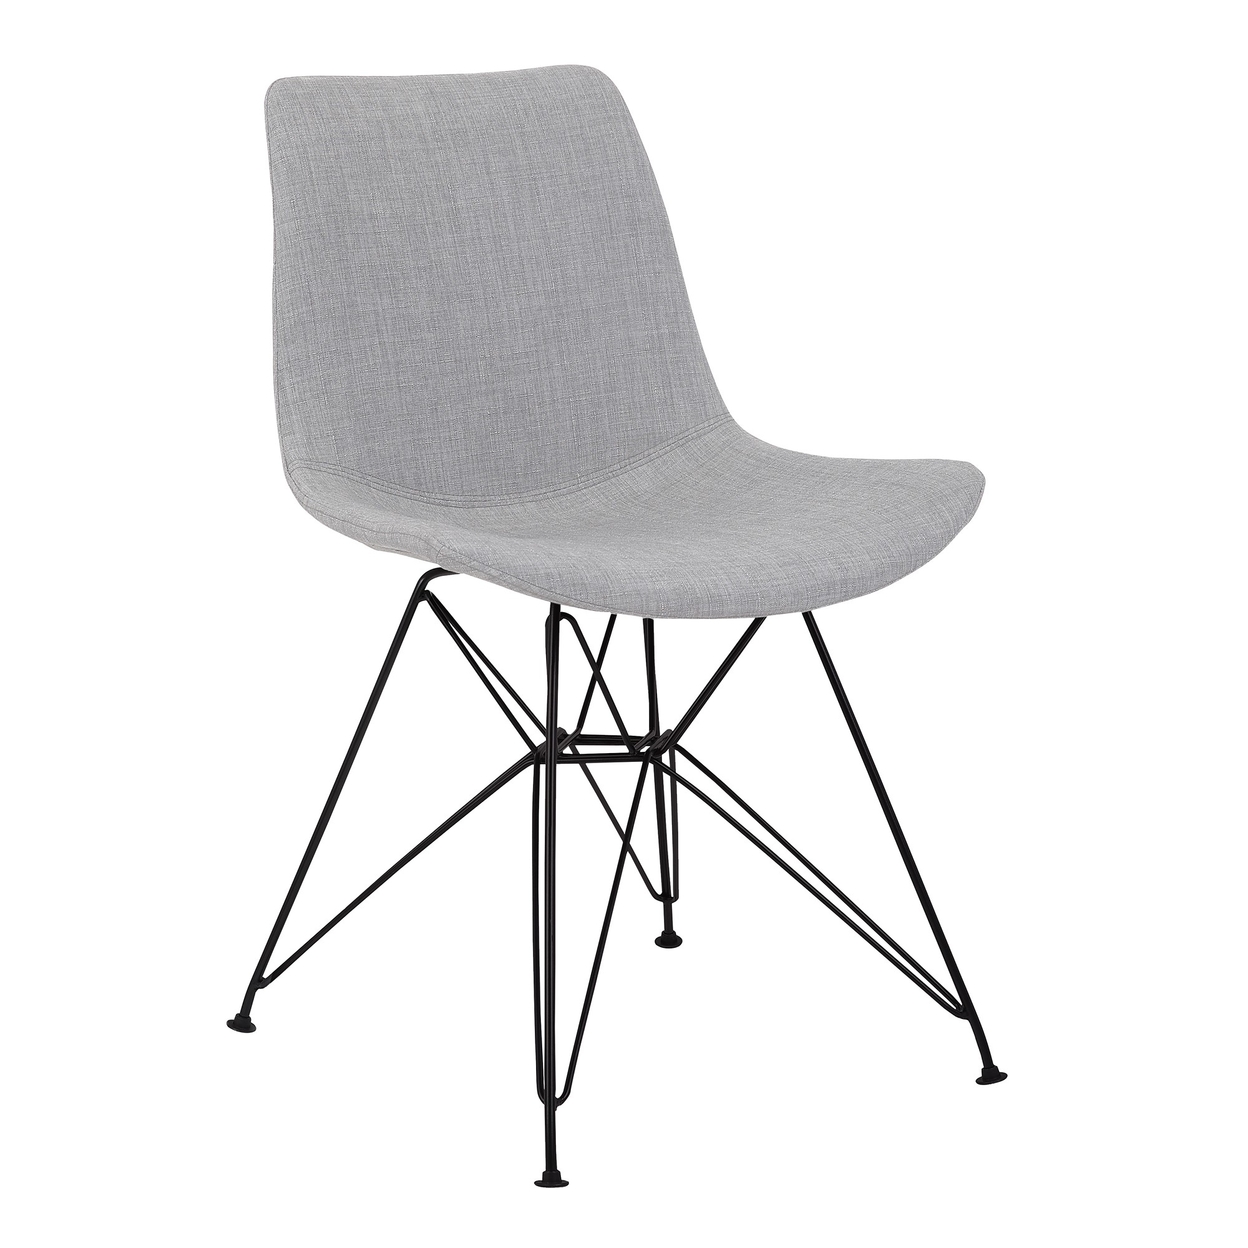 Fabric Dining Chair With Interconnected Metal Legs, Light Gray- Saltoro Sherpi